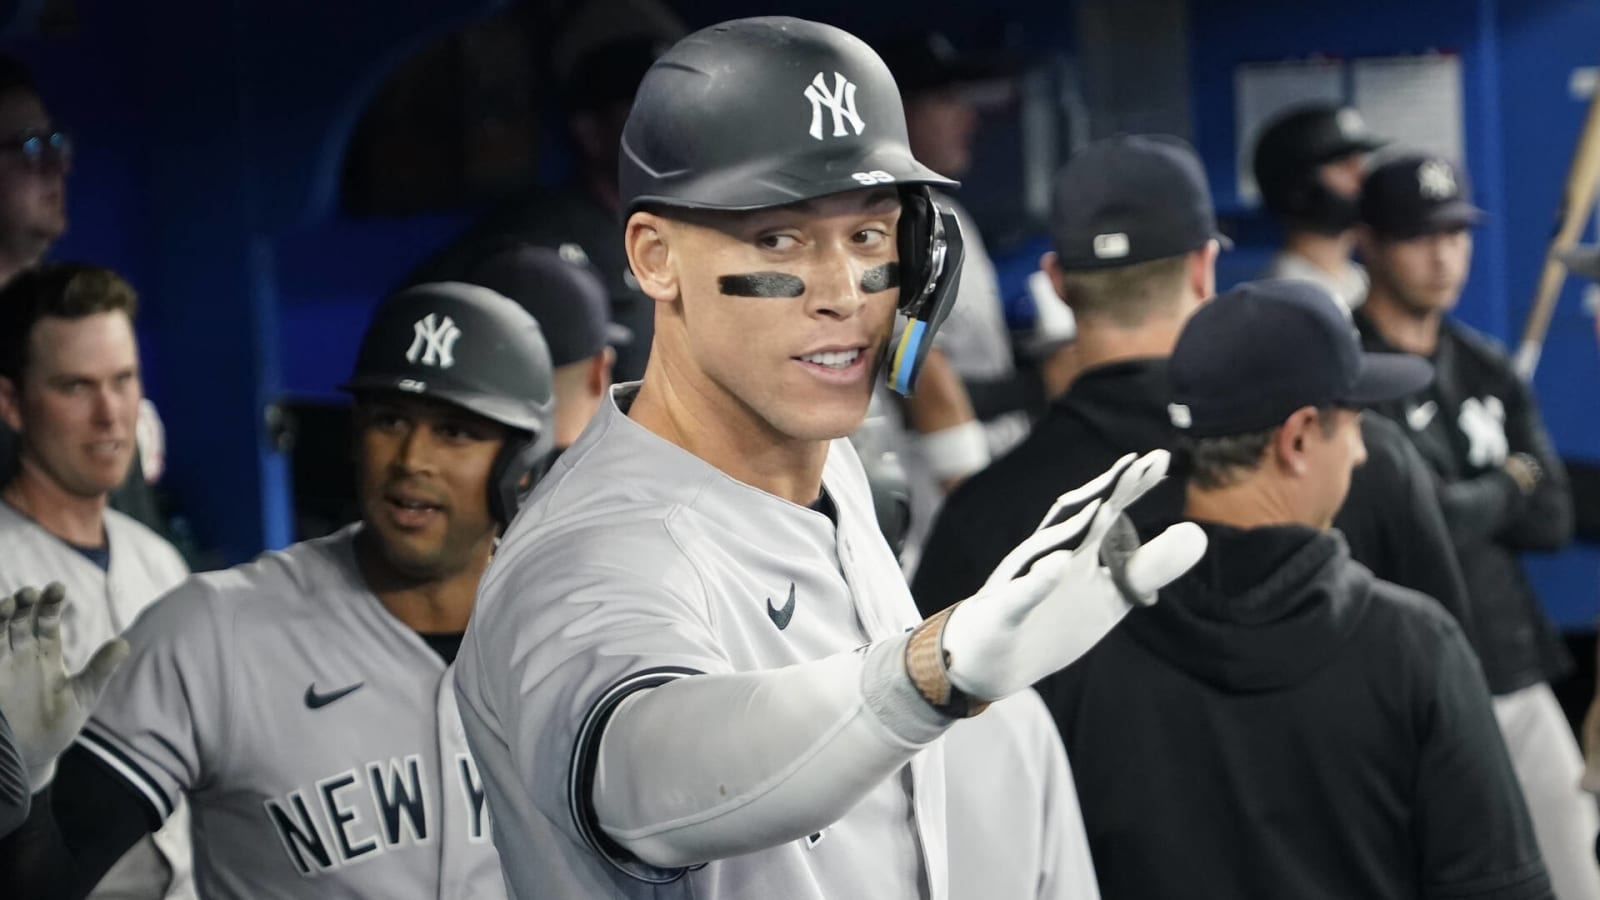 White Sox pitcher has solution for Aaron Judge's controversial AB vs. Blue Jays